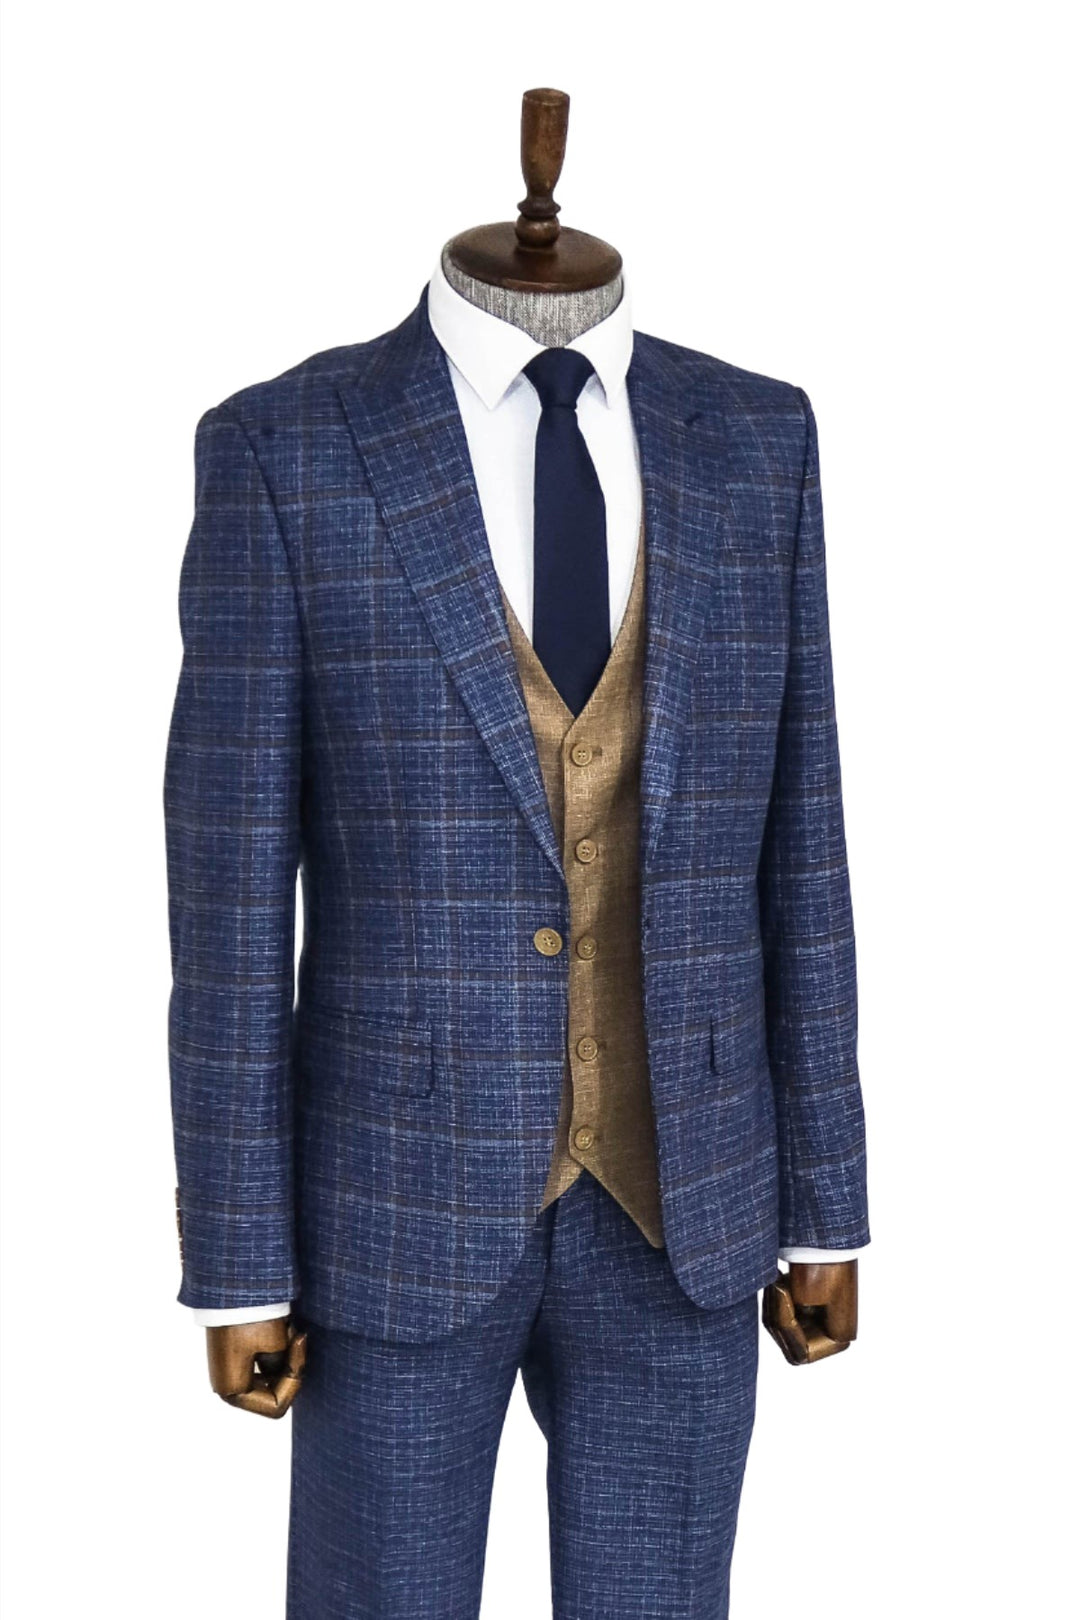 Slim Fit Checked Patterned Navy Blue Men Suit - Wessi